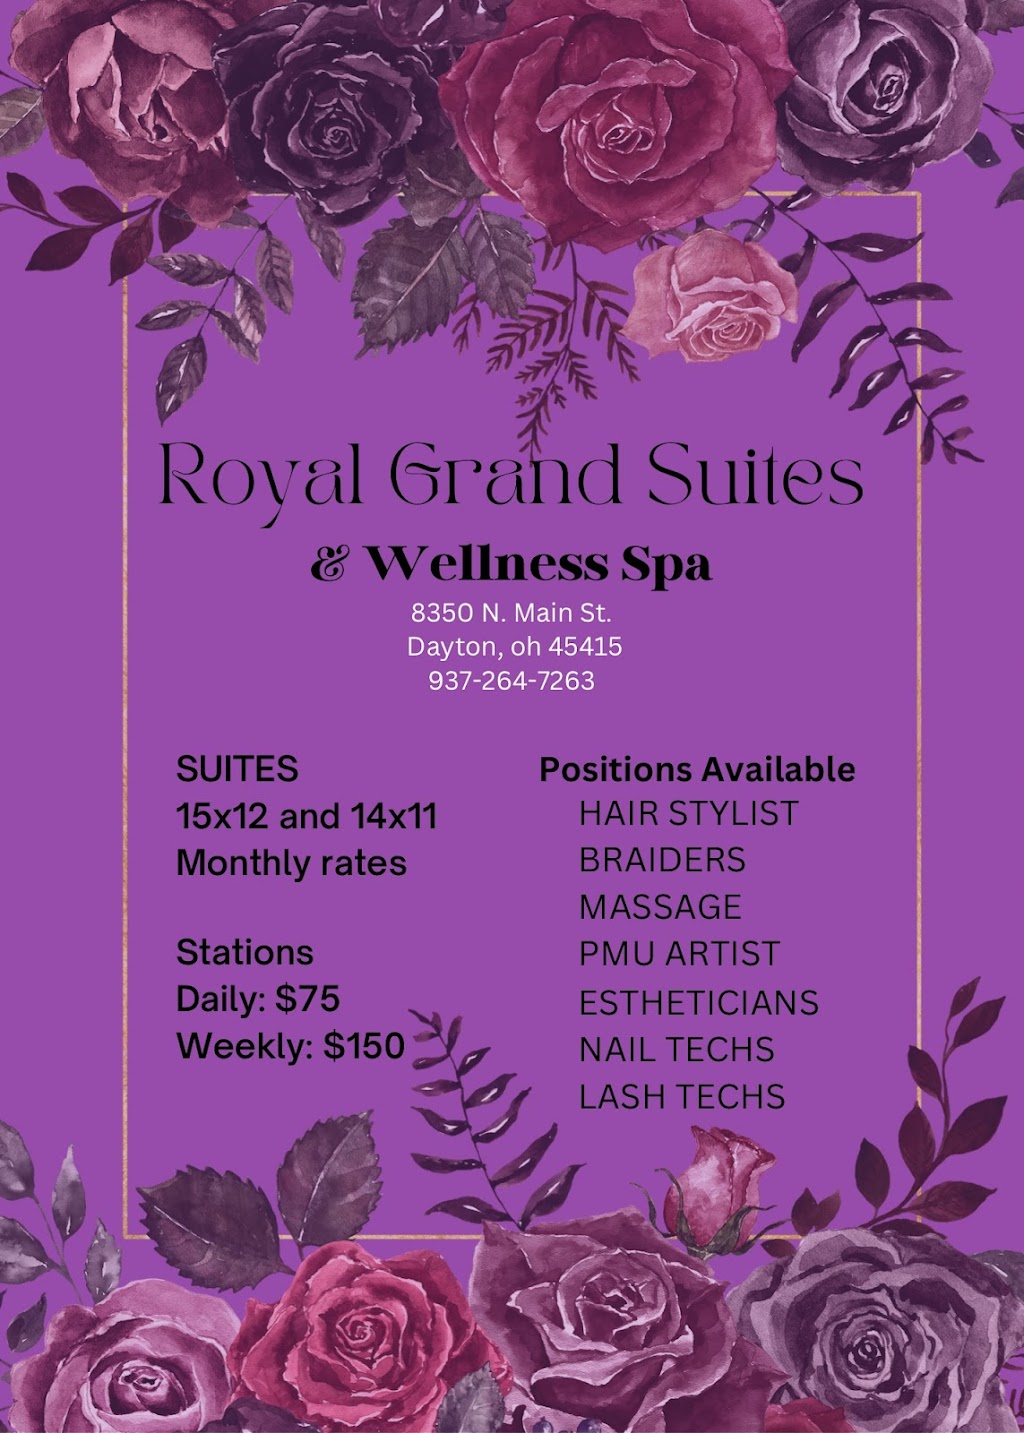 Royal Grand Suites and Wellness Spa | 8350 N Main St, Dayton, OH 45415 | Phone: (937) 264-7263